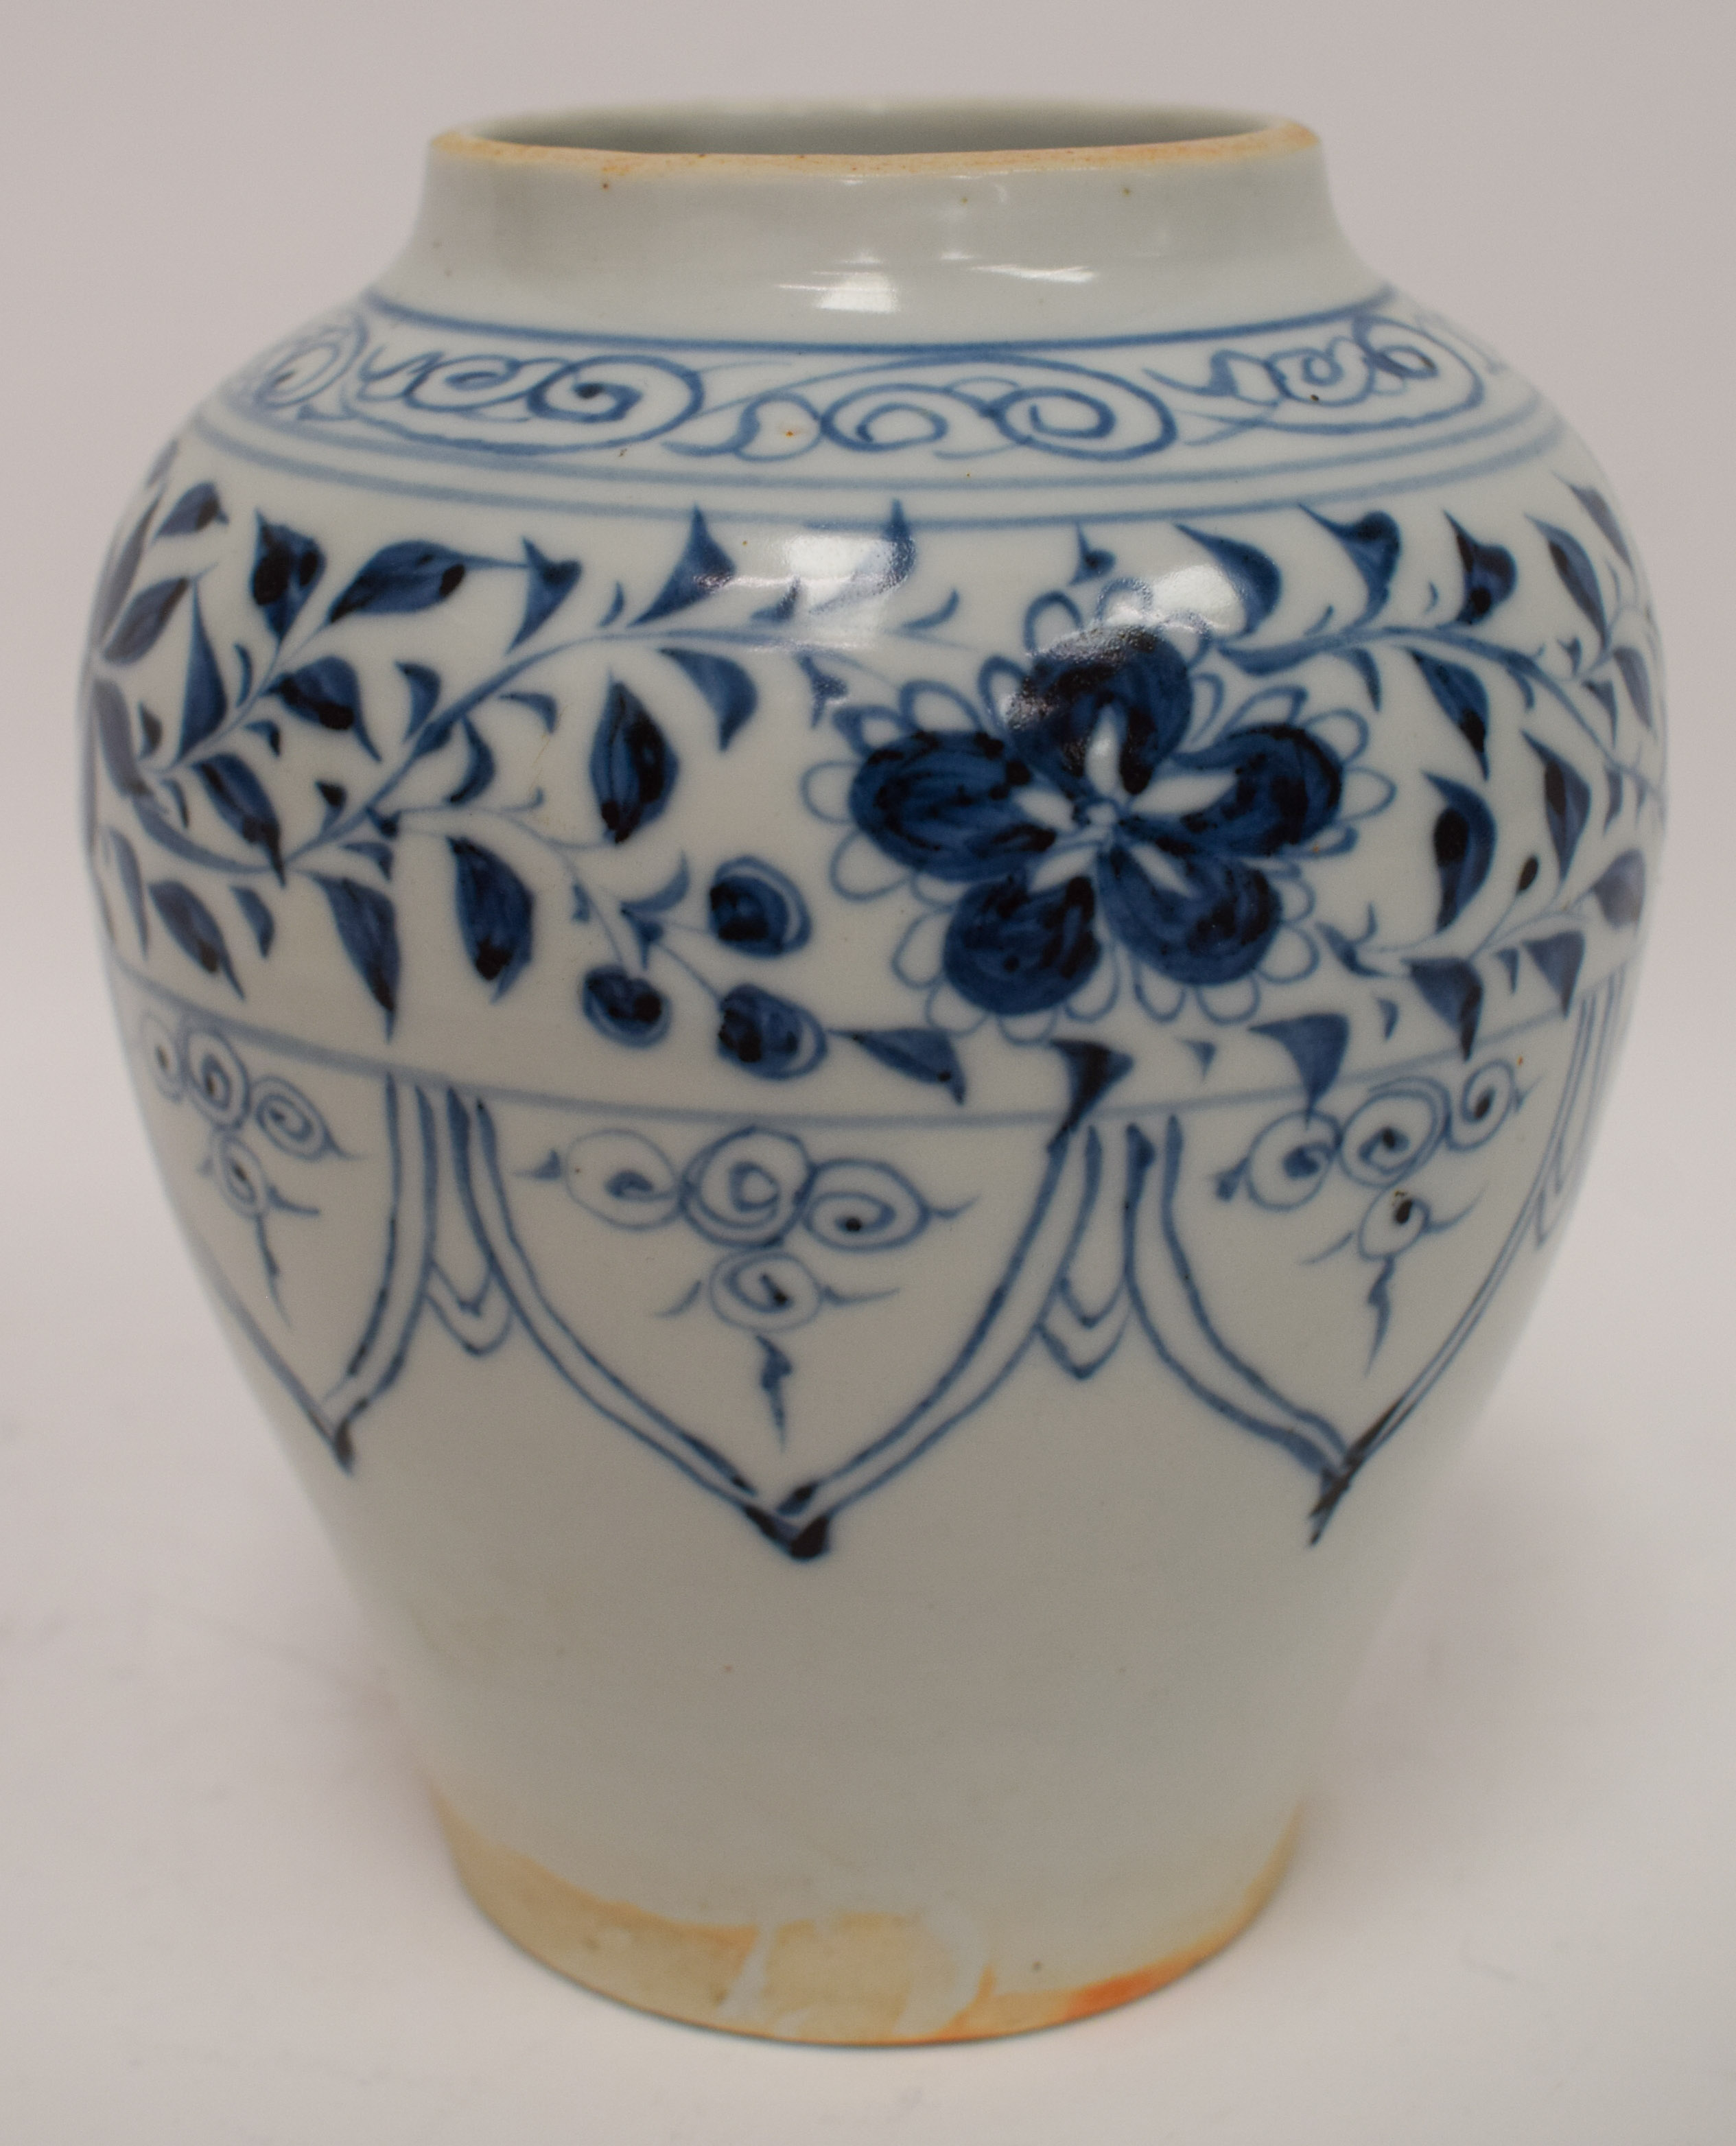 A VERY RARE EARLY CHINESE BLUE AND WHITE PORCELAIN JAR possibly Yuan Dynasty (1279-1368), painted wi - Image 6 of 9